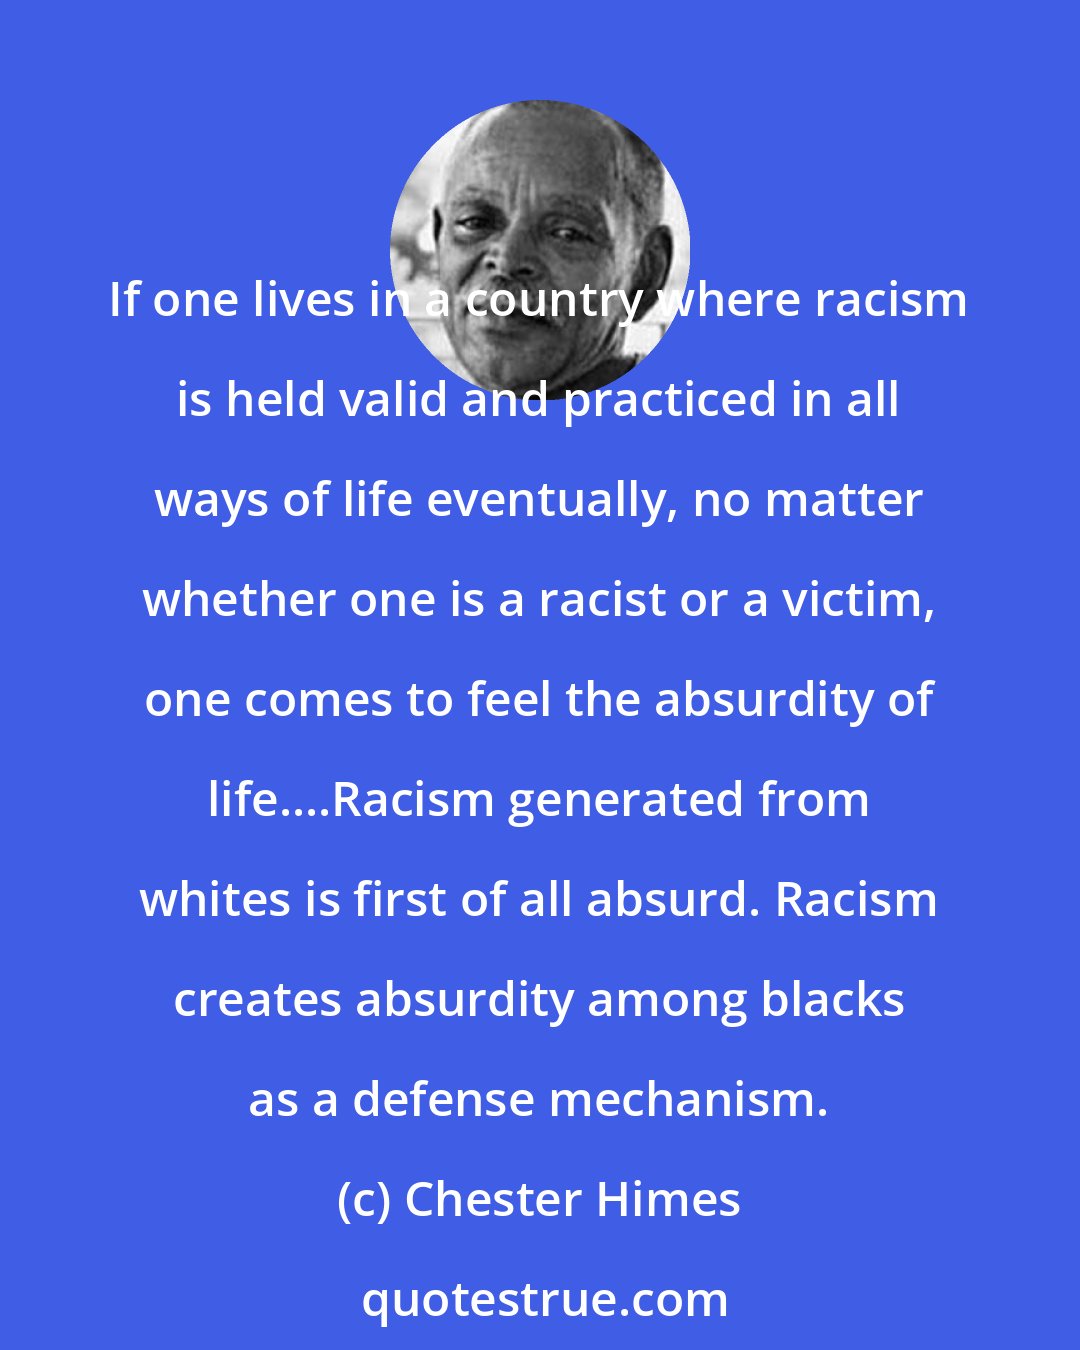 Chester Himes: If one lives in a country where racism is held valid and practiced in all ways of life eventually, no matter whether one is a racist or a victim, one comes to feel the absurdity of life....Racism generated from whites is first of all absurd. Racism creates absurdity among blacks as a defense mechanism.